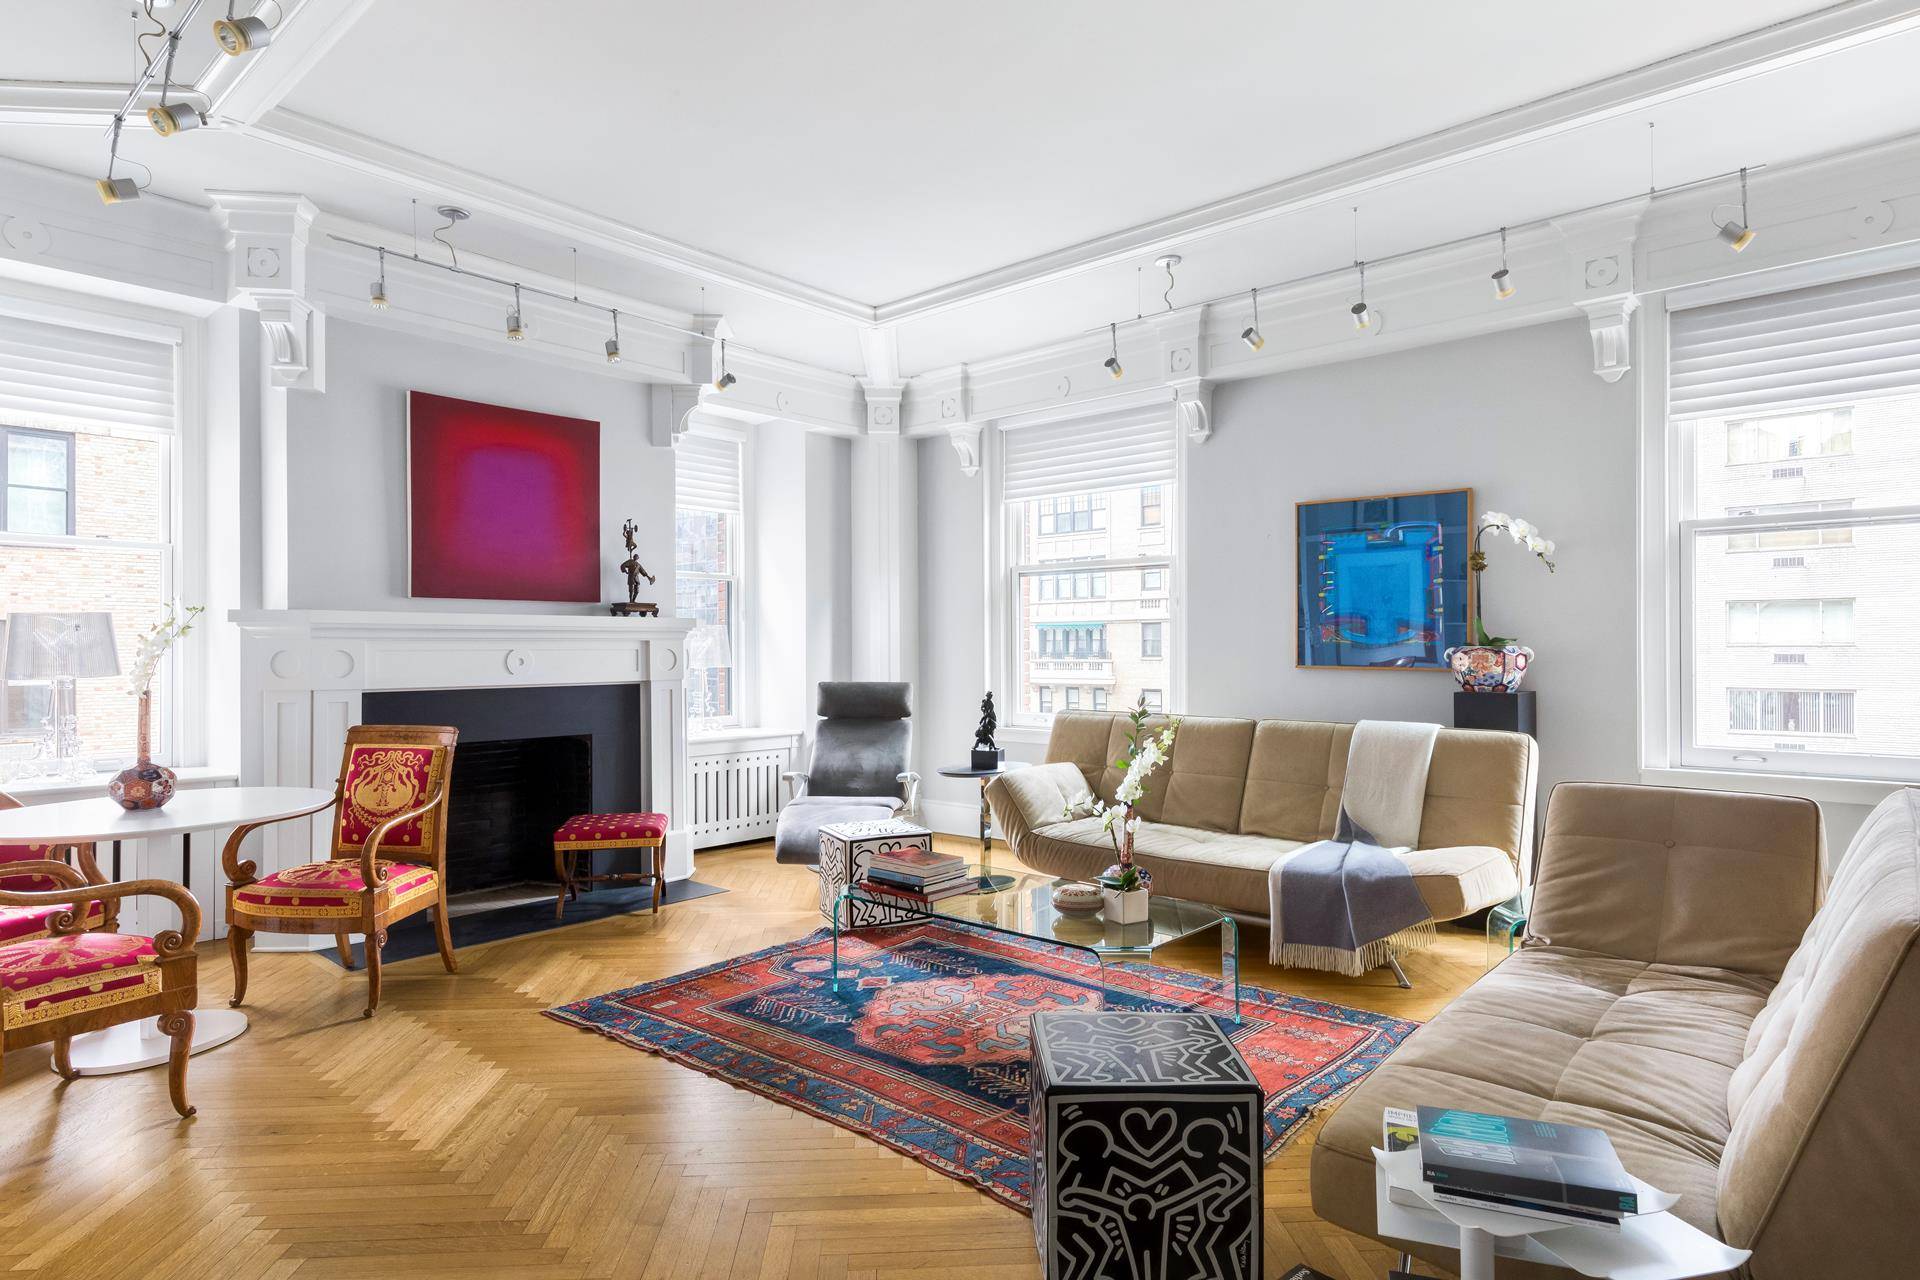 This pristine, mint condition apartment on Park Avenue has all the charm and look of a chic Parisian atelier, with its elegant prewar details, beautiful moldings, and cove ceilings.